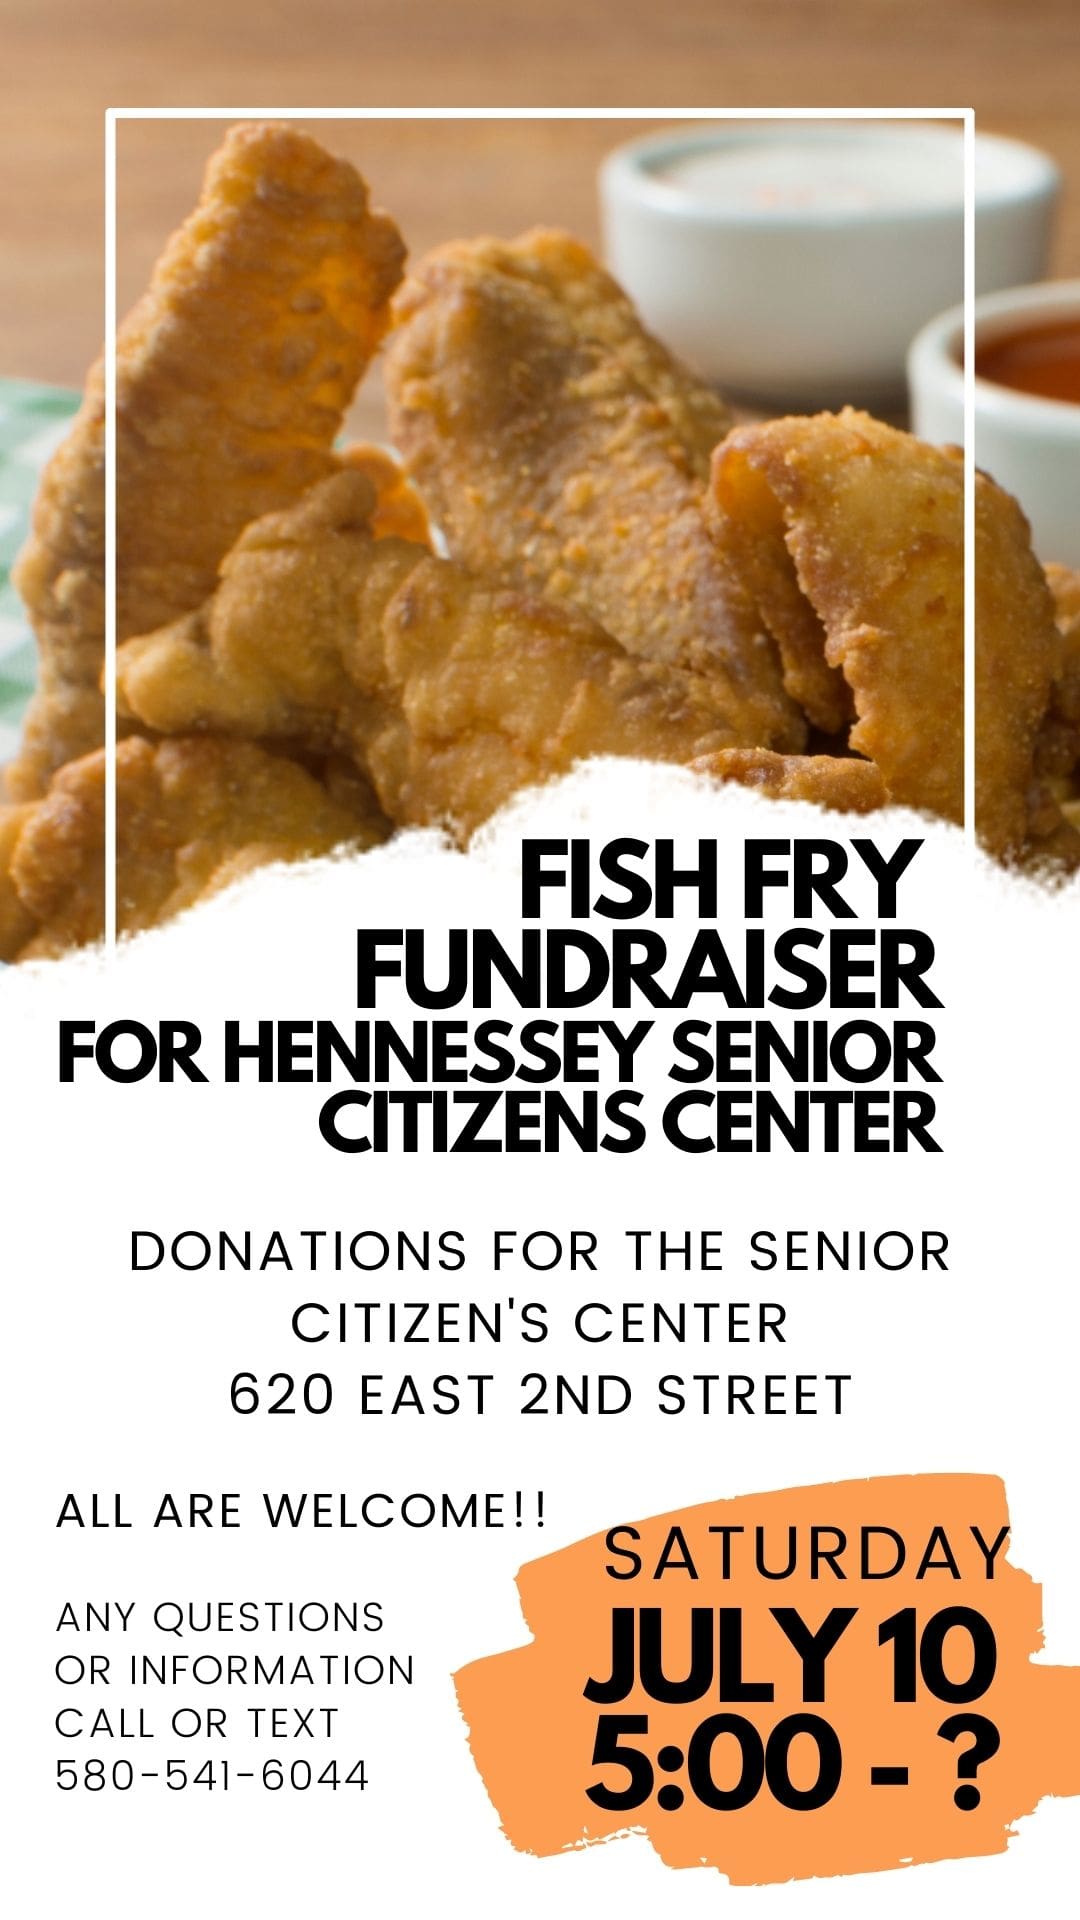 July 10th at 5:00 FISH FRY FUNDRAISER FOR THE SENIOR CITIZENS CENTER!! Everyone welcome!!